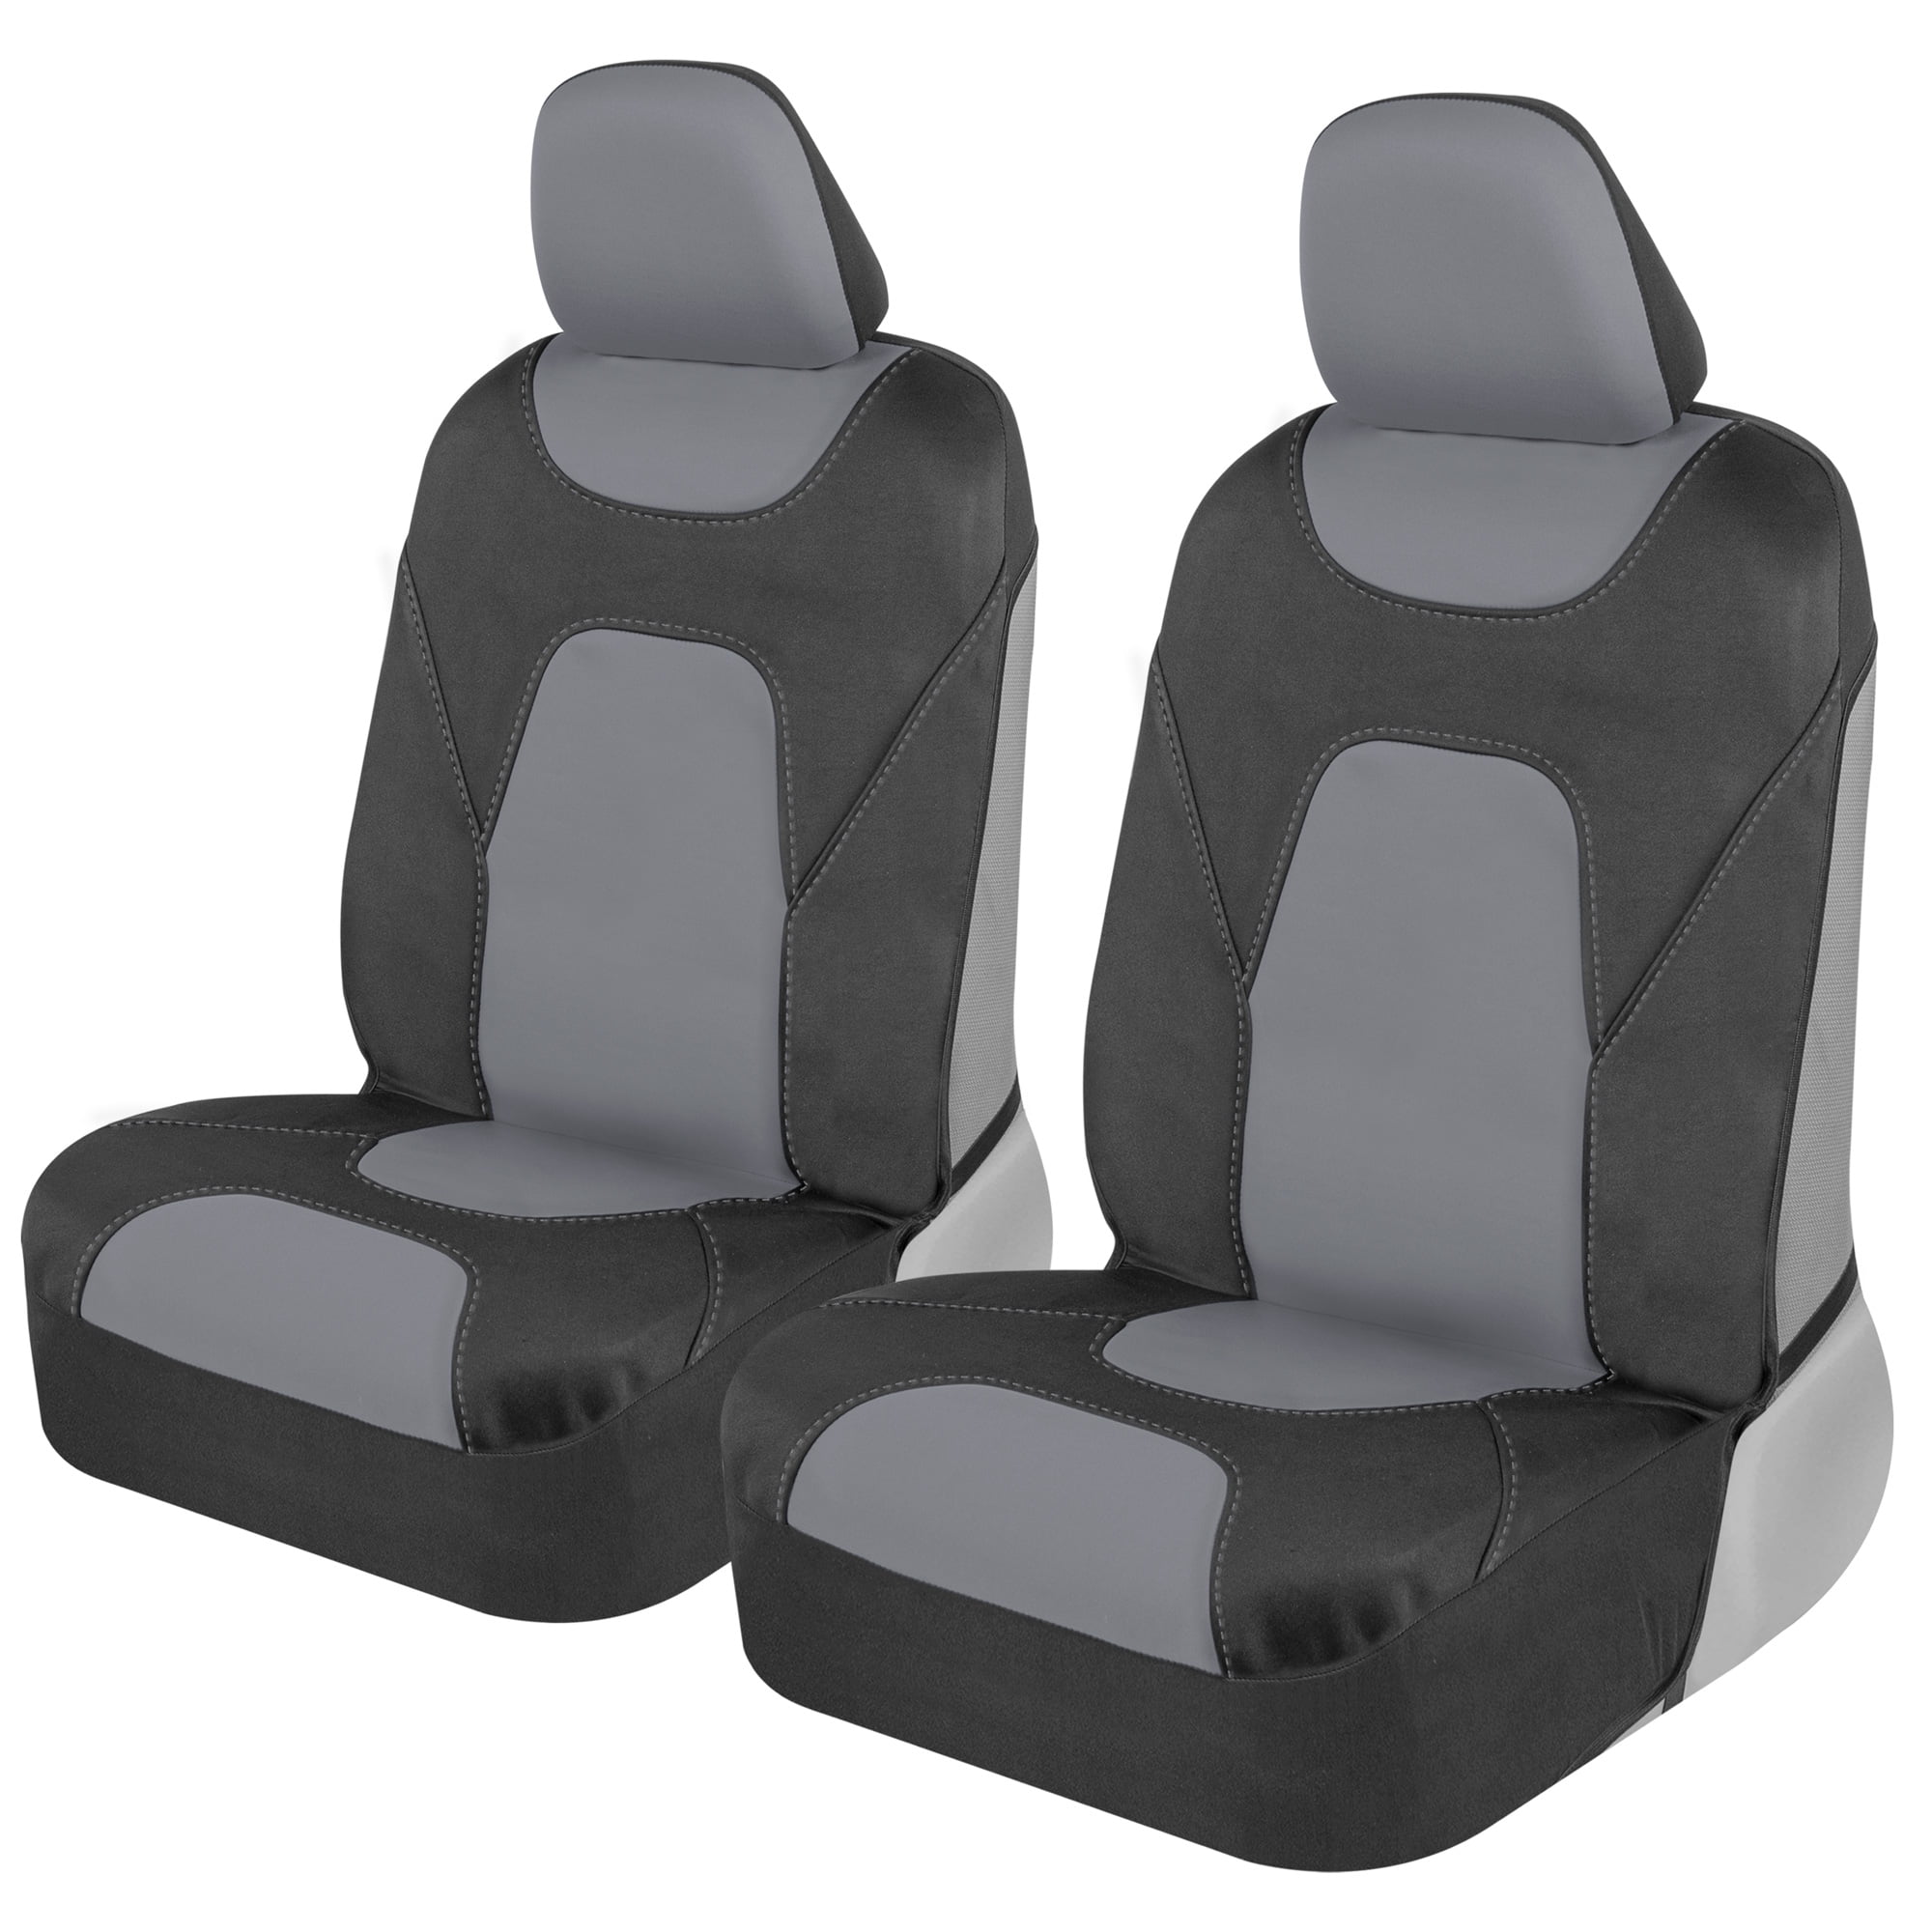 ZATOOTO Car Cool Seat Covers for Summer, 1 PCS Front Seat Protectors Back  Pain Support Pressure Relief Black Breathable Chair Cushions All Types  Cars